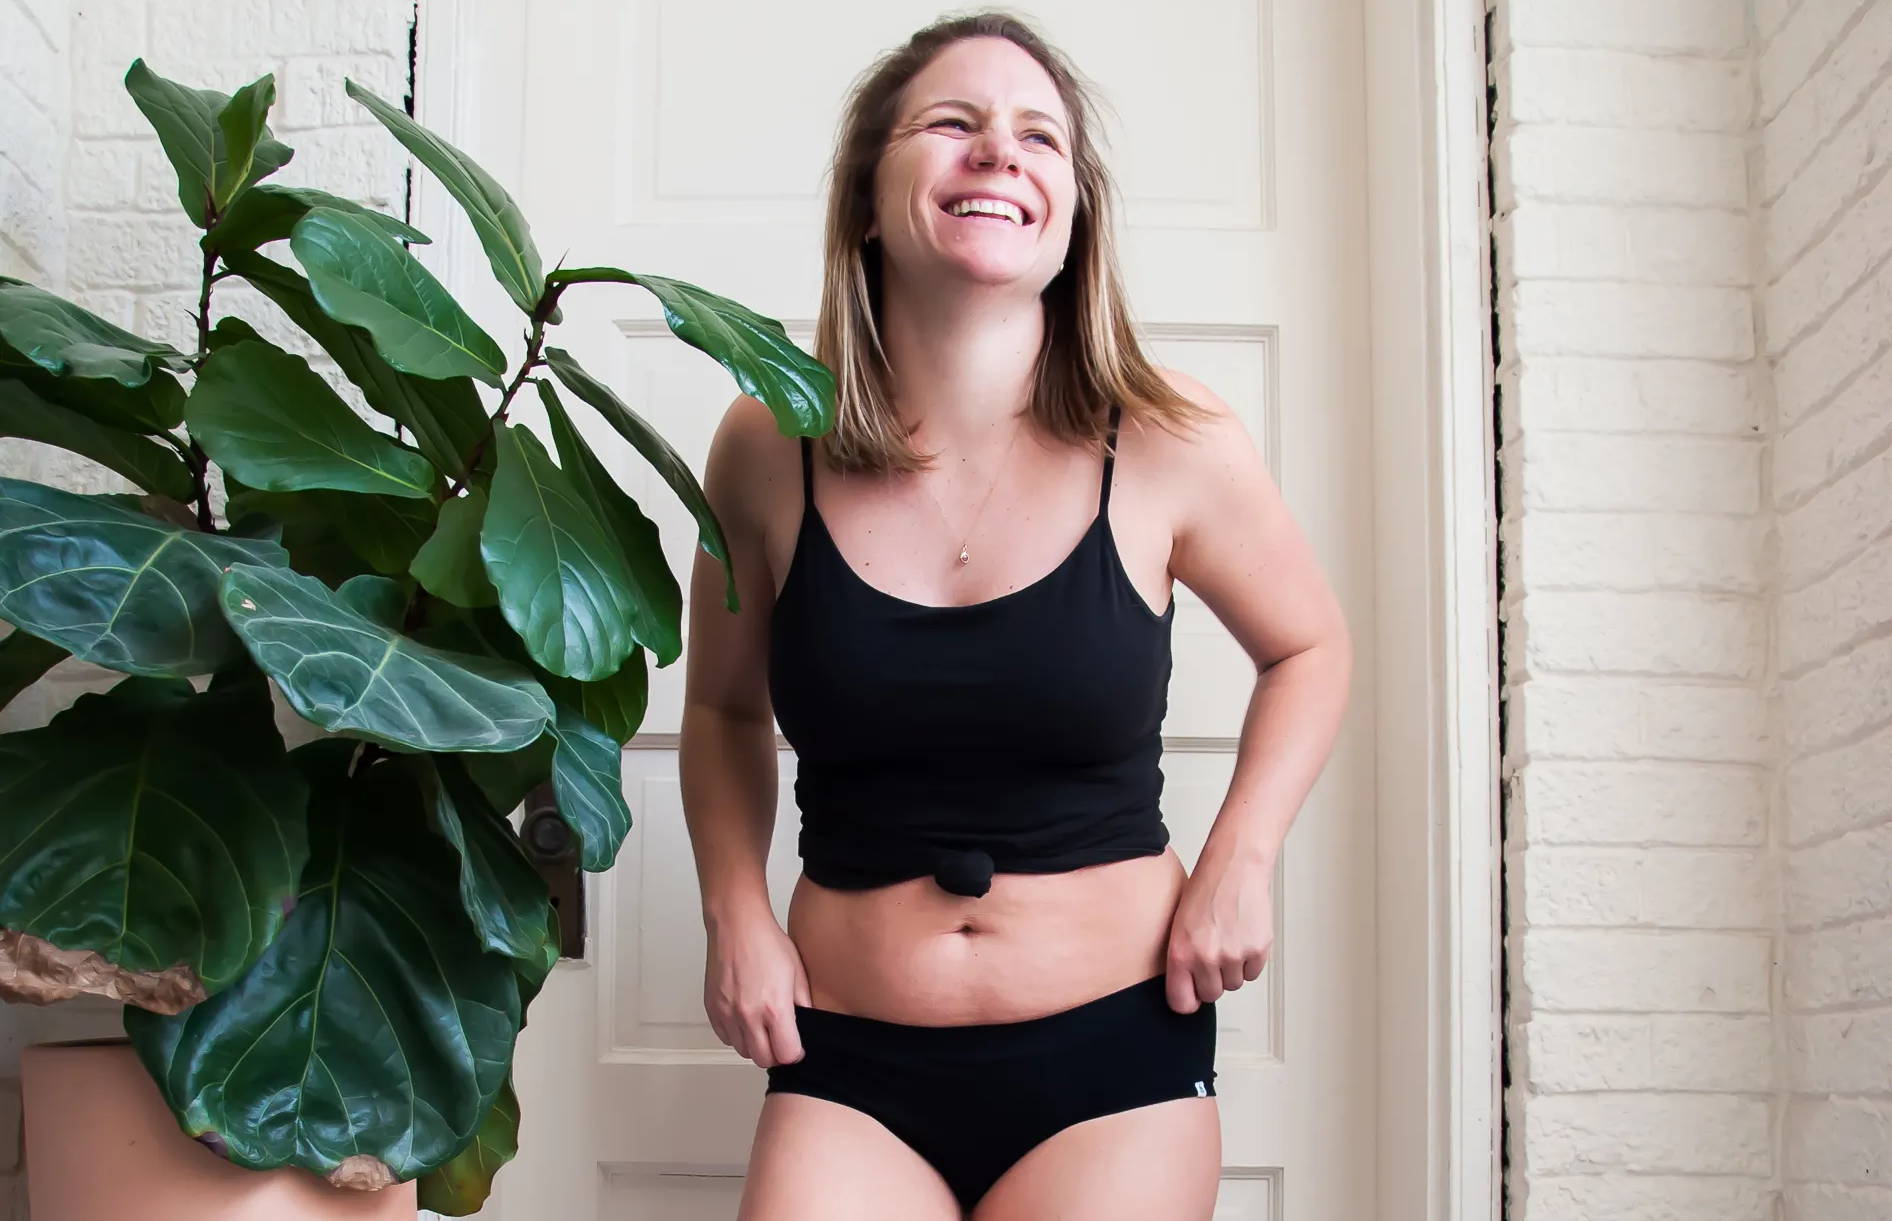 A woman stands next to a plant in WAMA hemp underwear and a tank top, smiling.